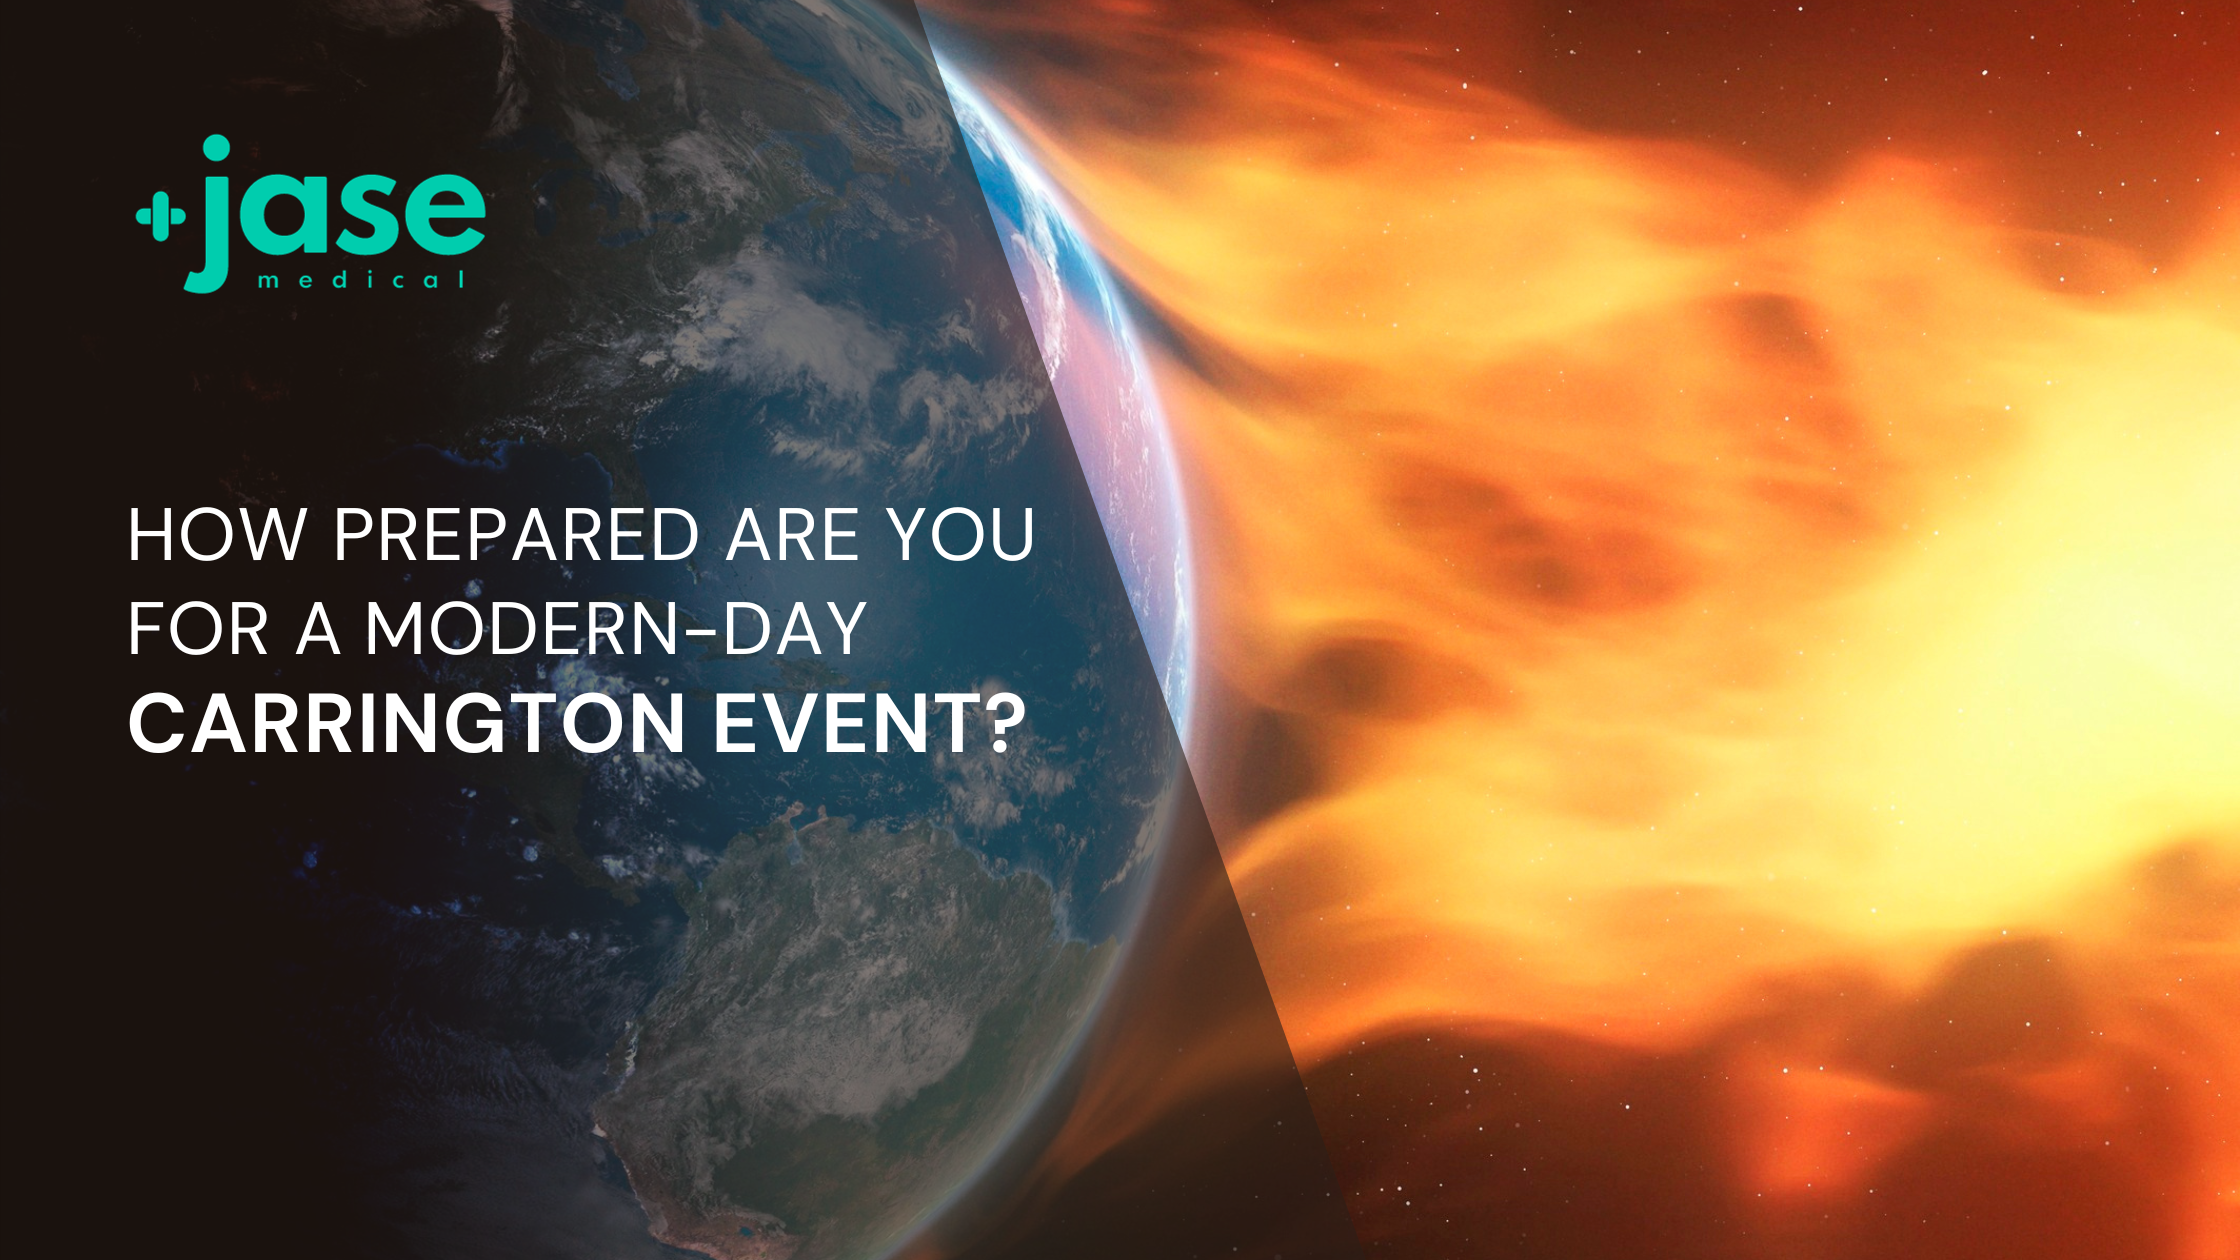 How Prepared are You for a Modern-Day Carrington Event?